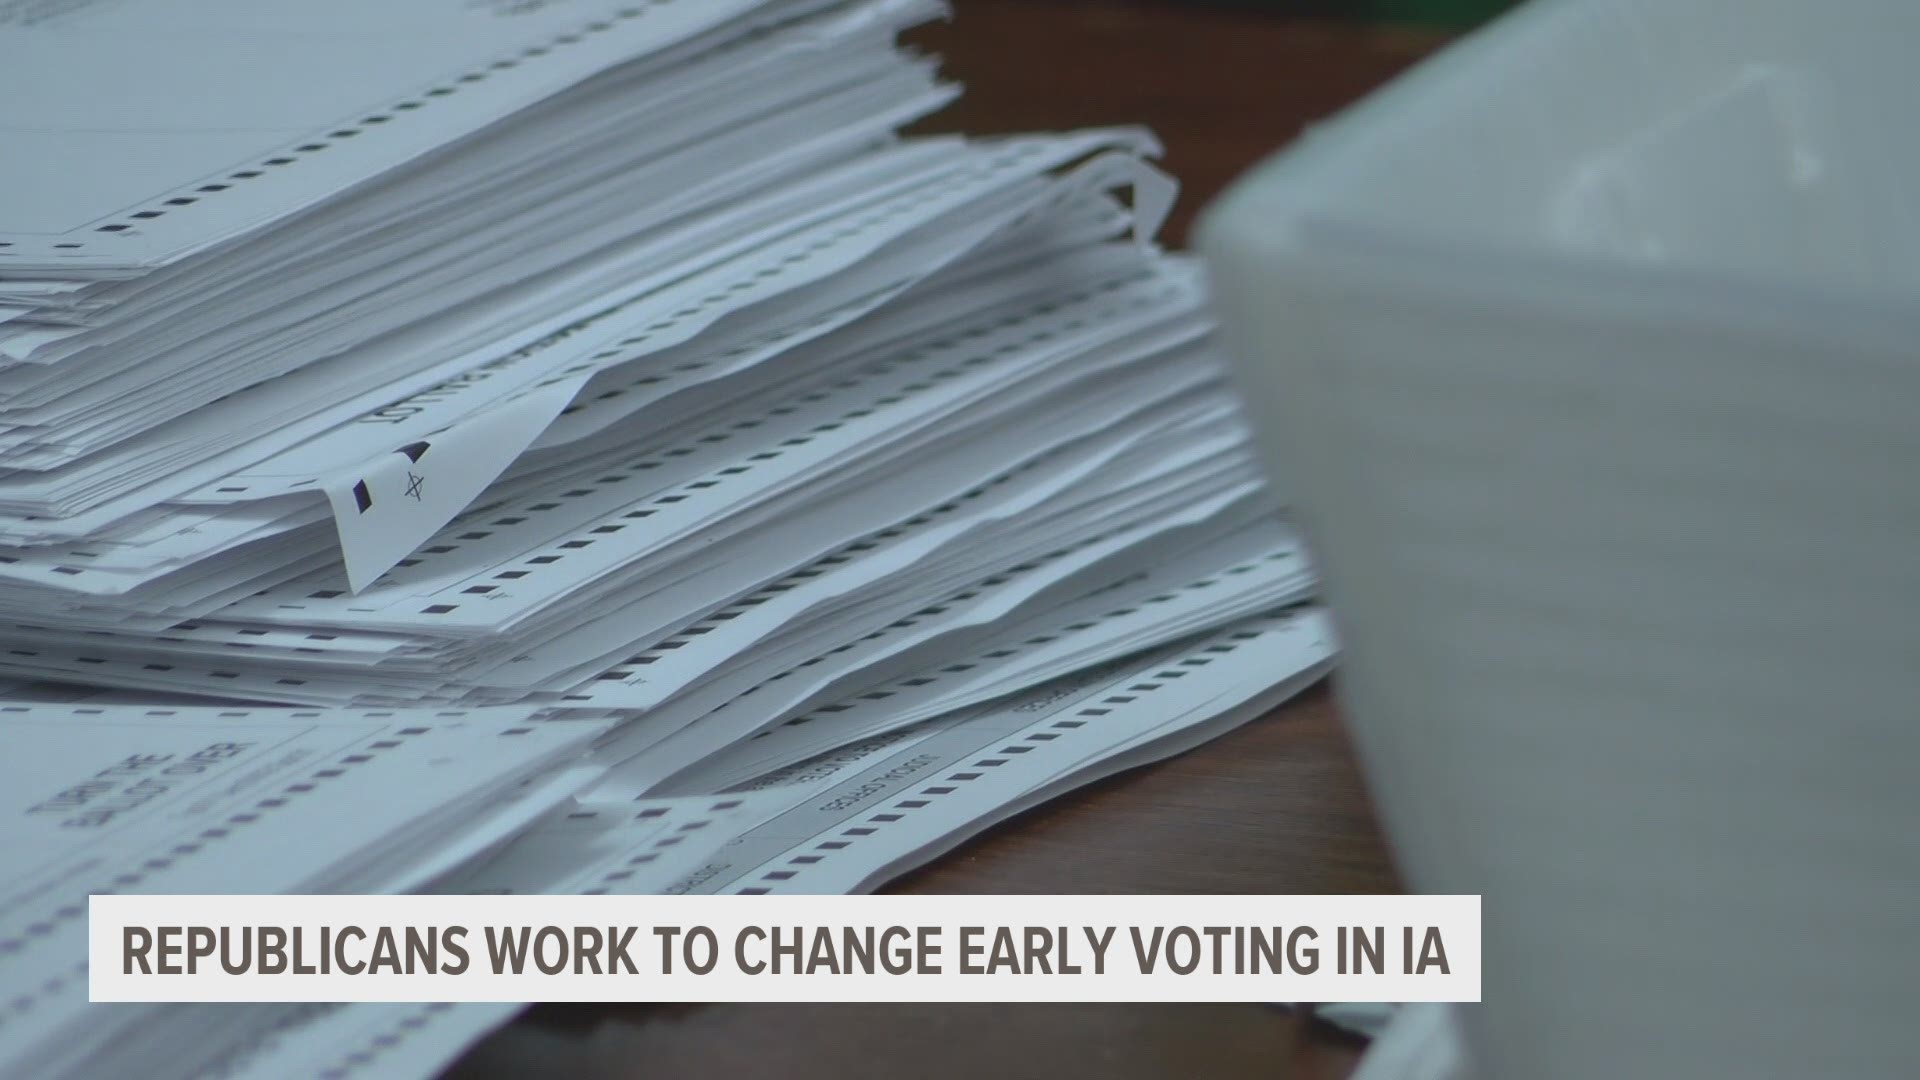 The Iowa House bill aims to shorten the time frame for early voting, strengthen ballot rules and add the ability to criminally charge county auditors.